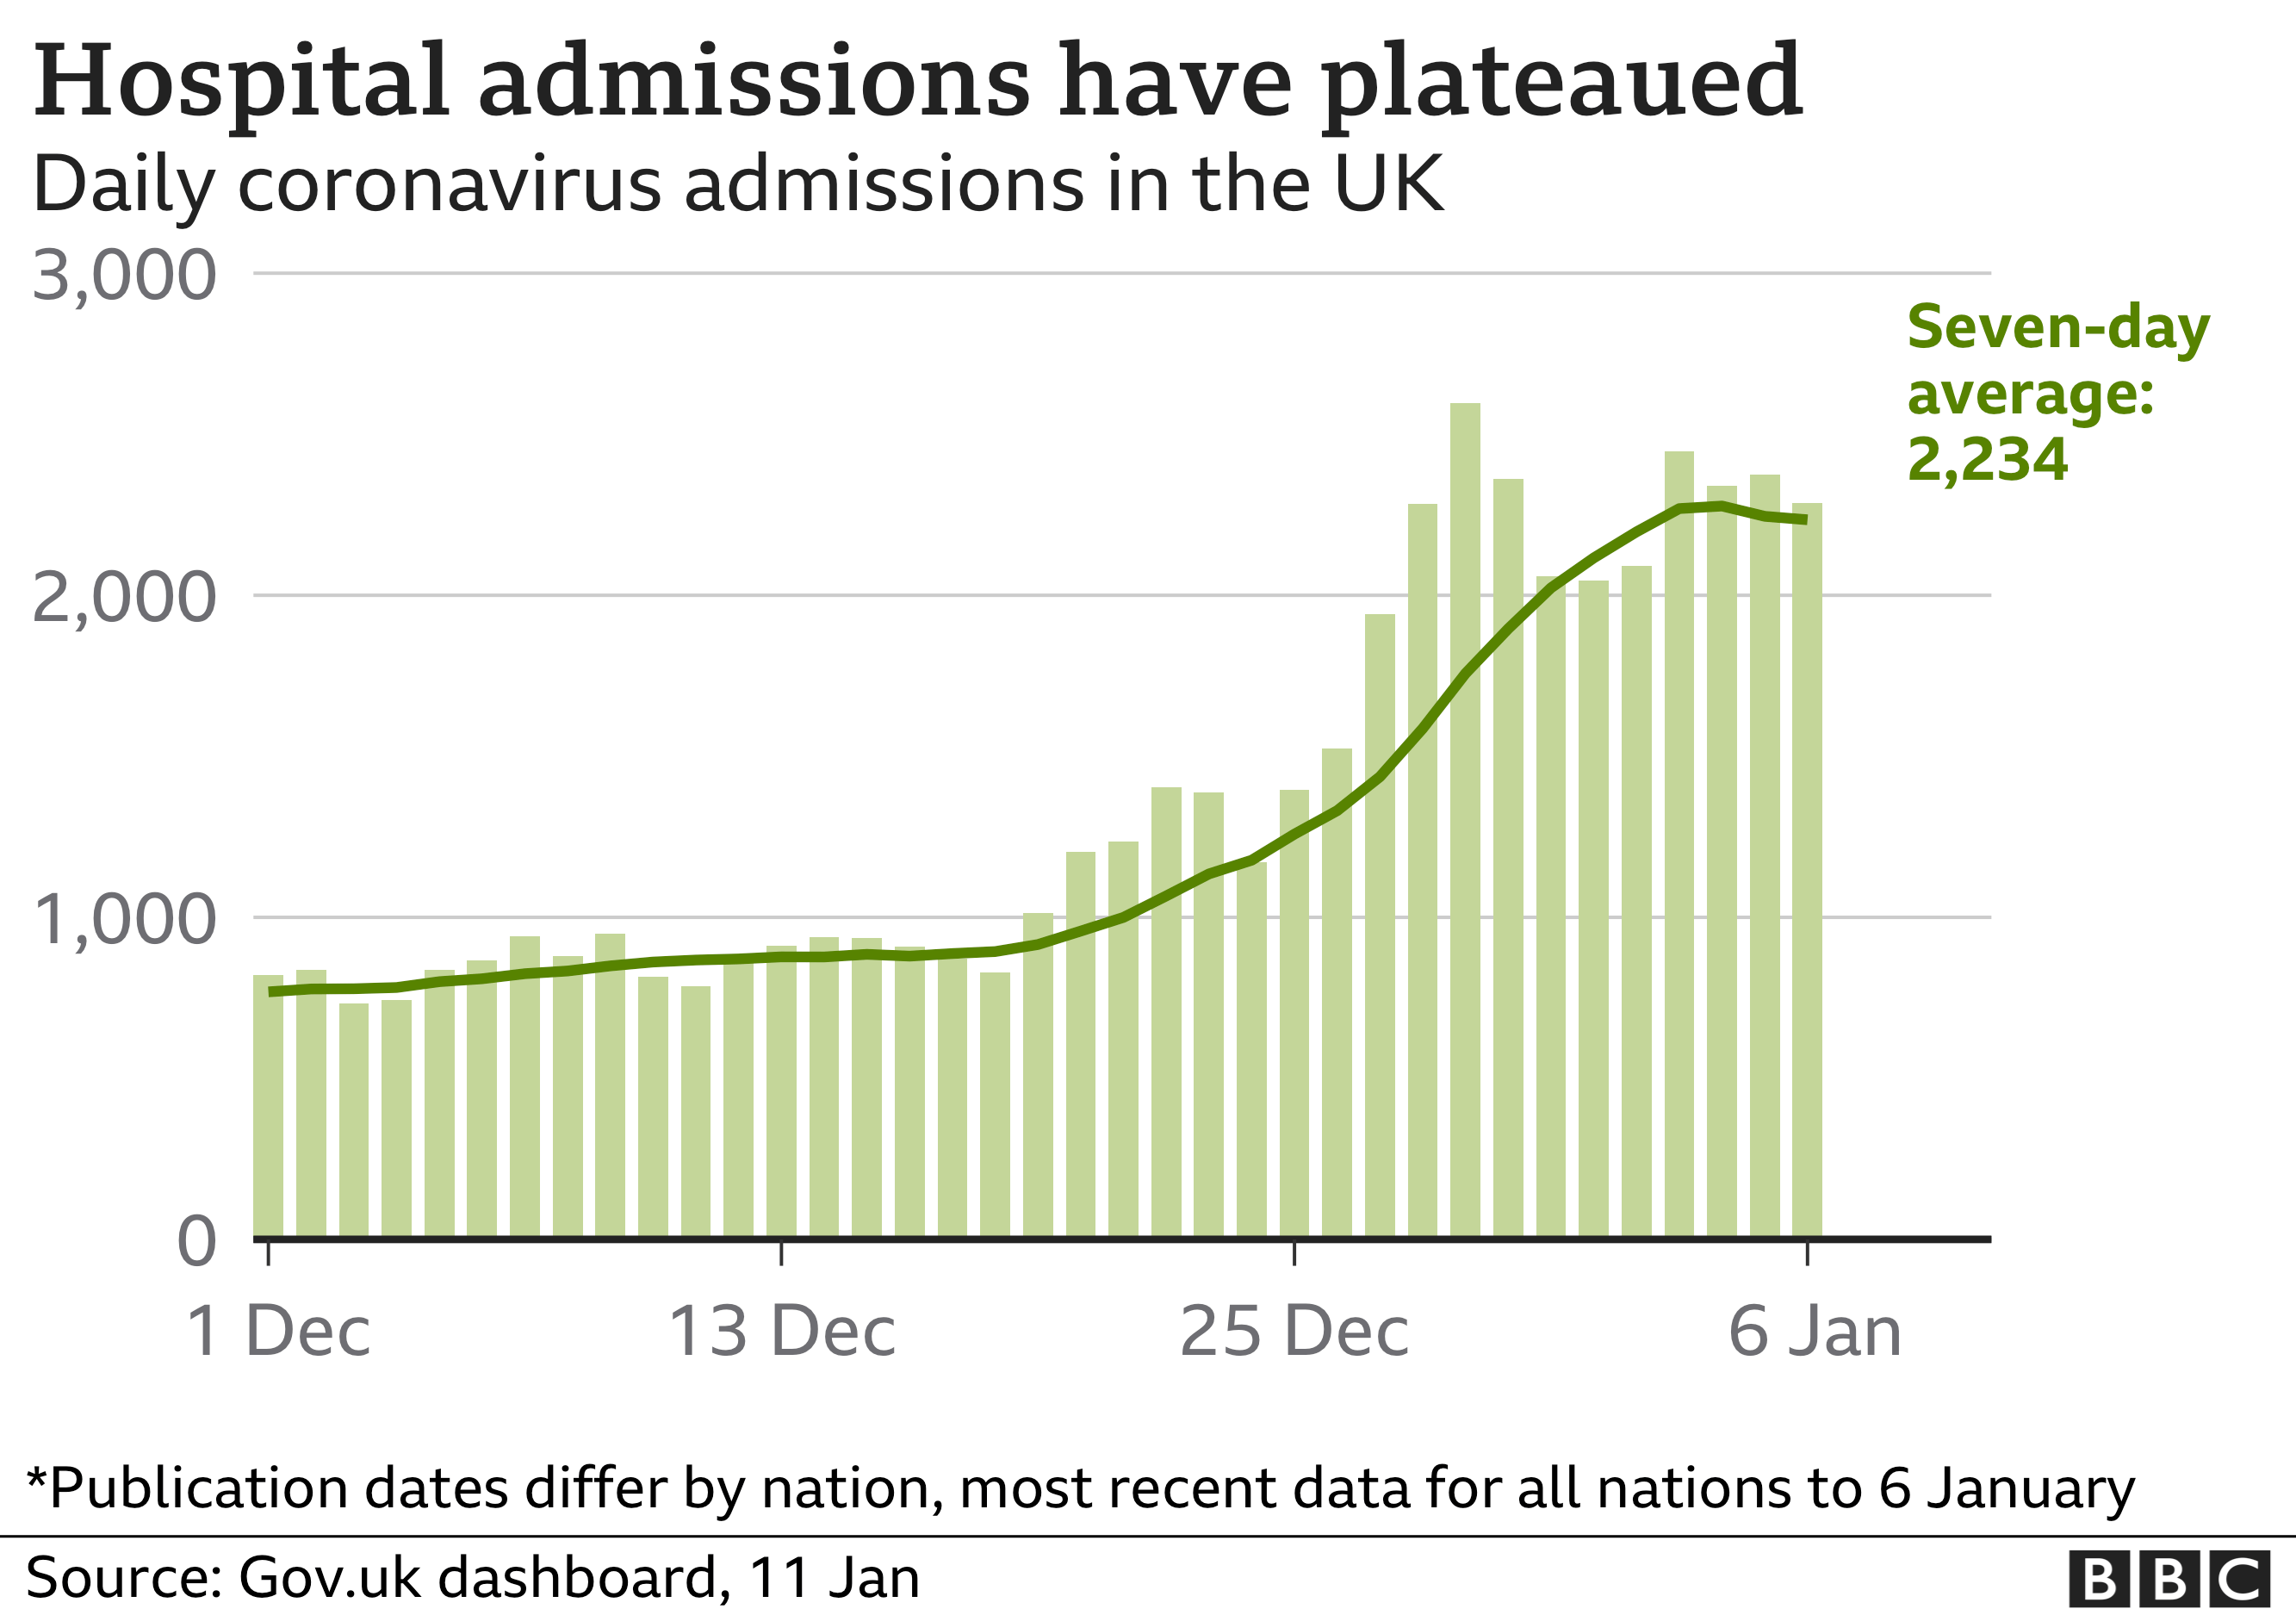 Chart showing hospital admissions